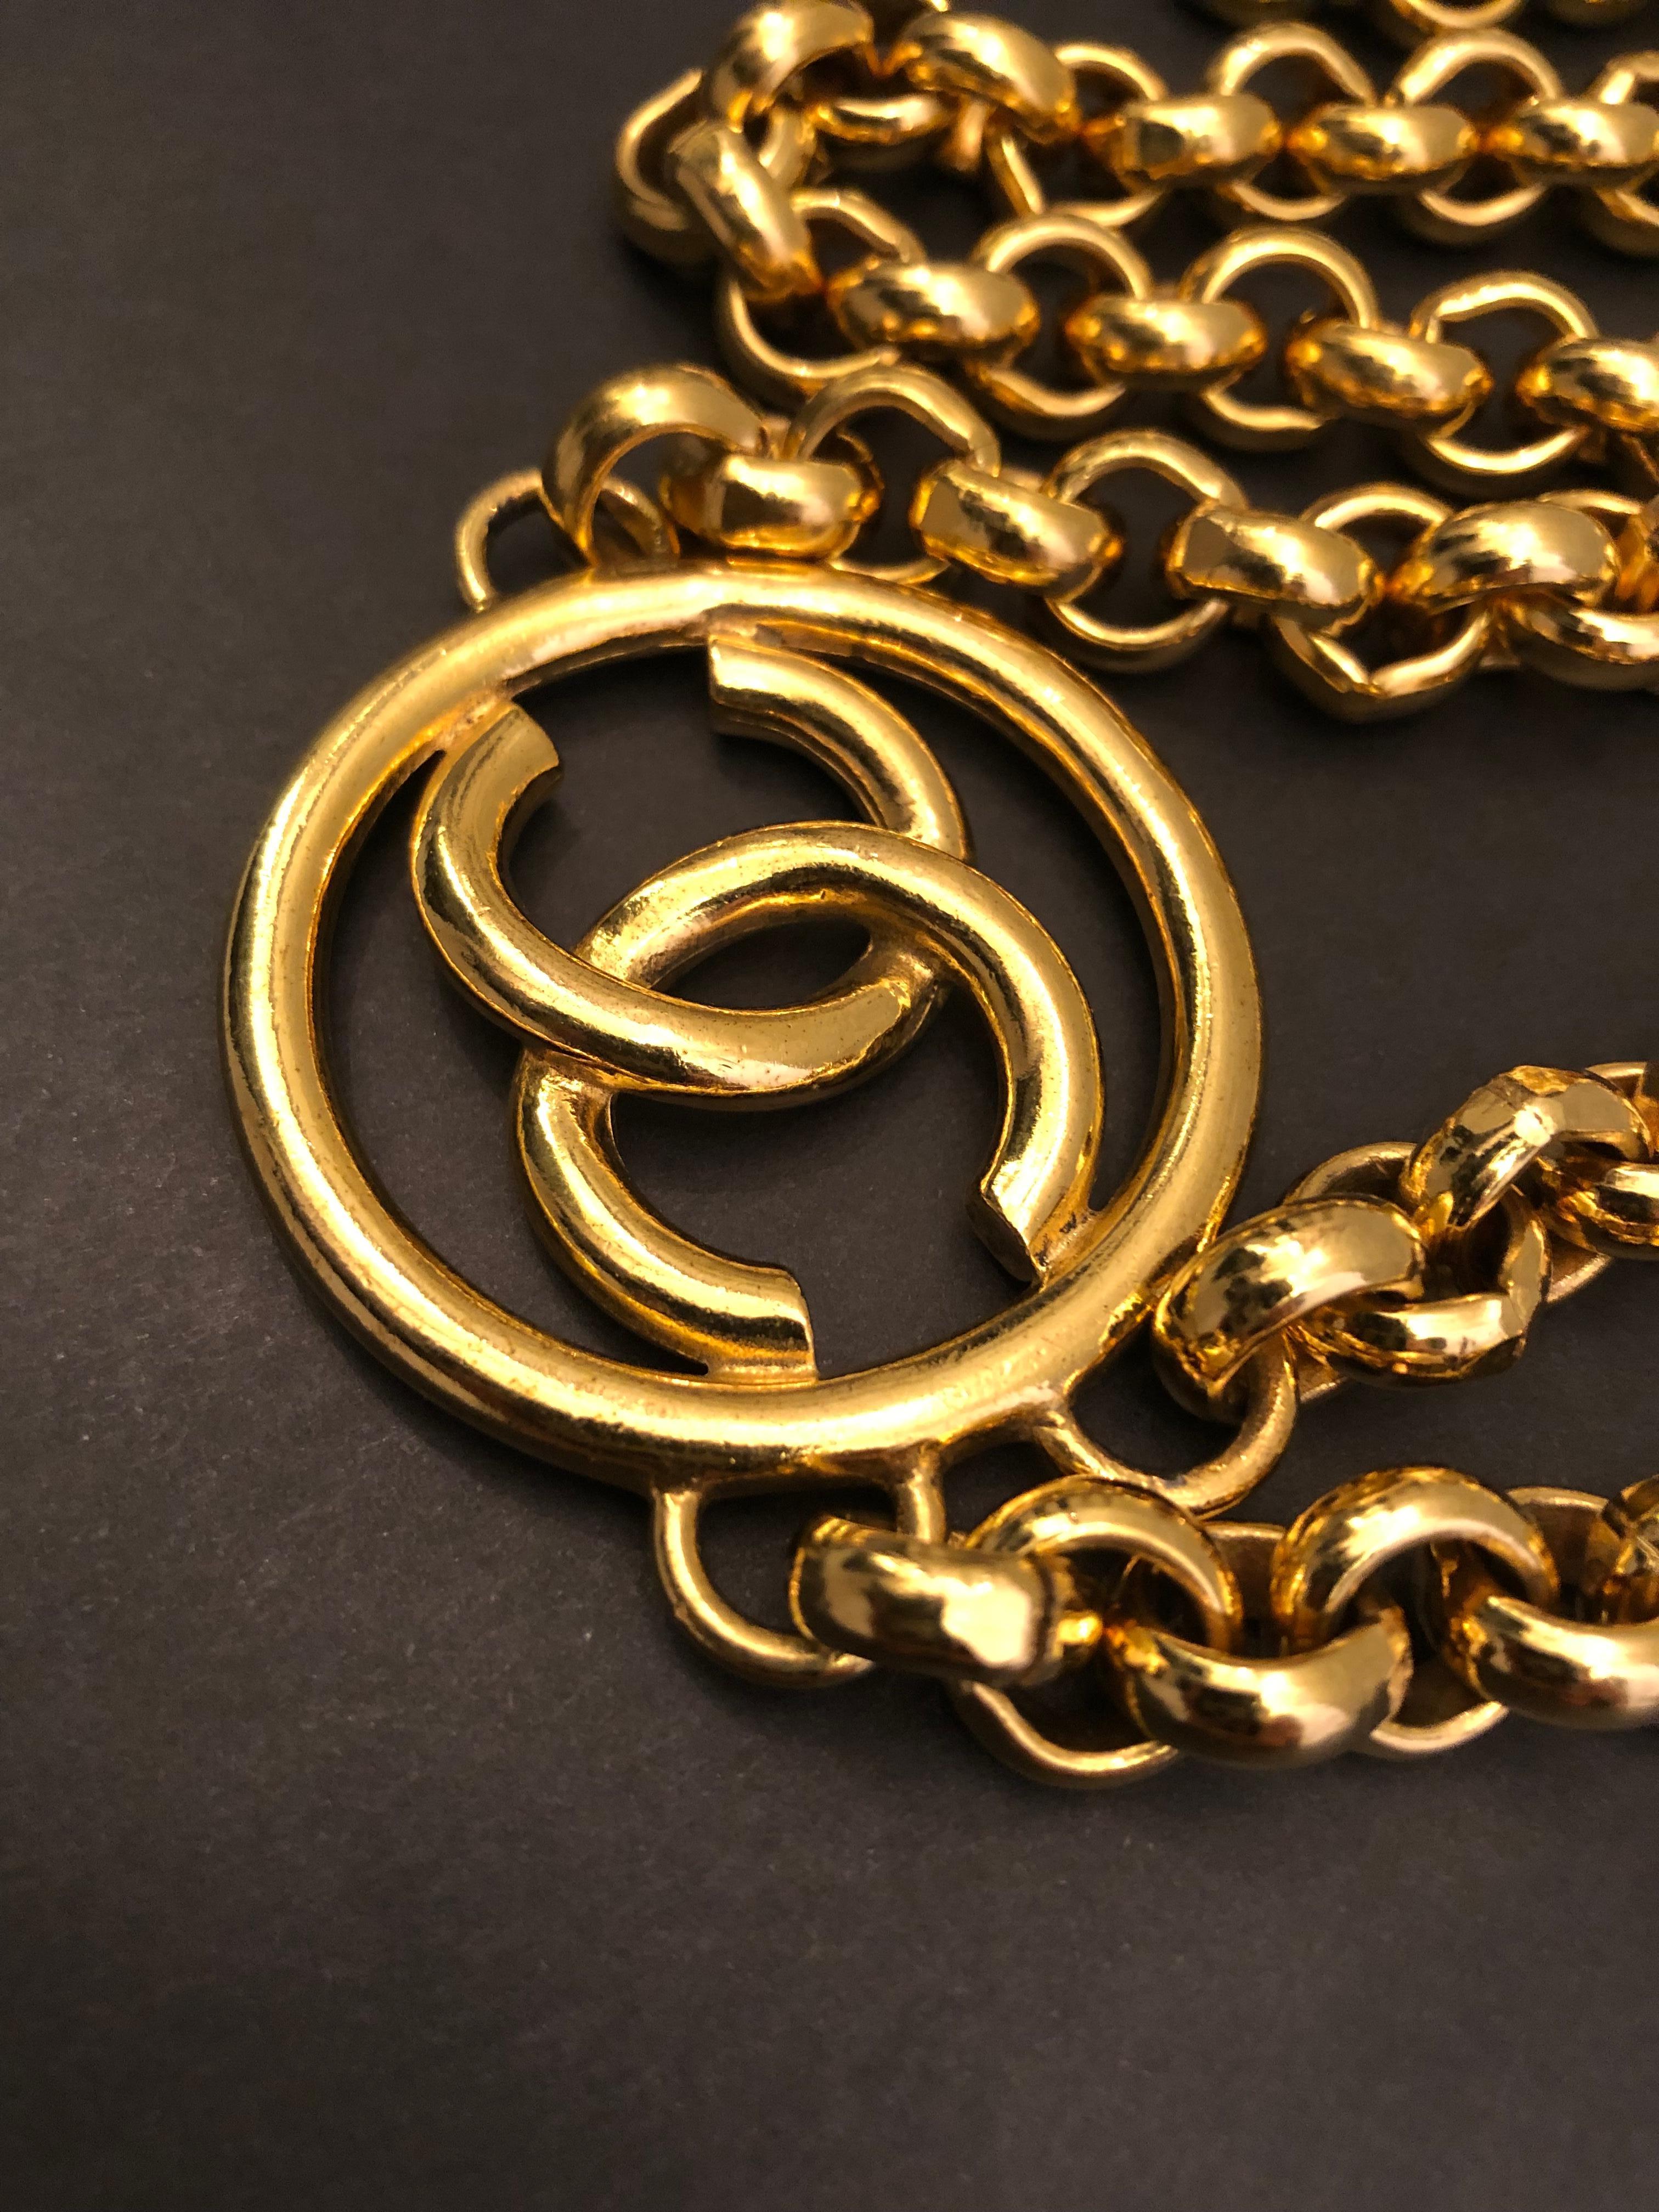 1993 Vintage CHANEL Gold Toned Clover CC Chain Belt 42 Inches Long For Sale 1